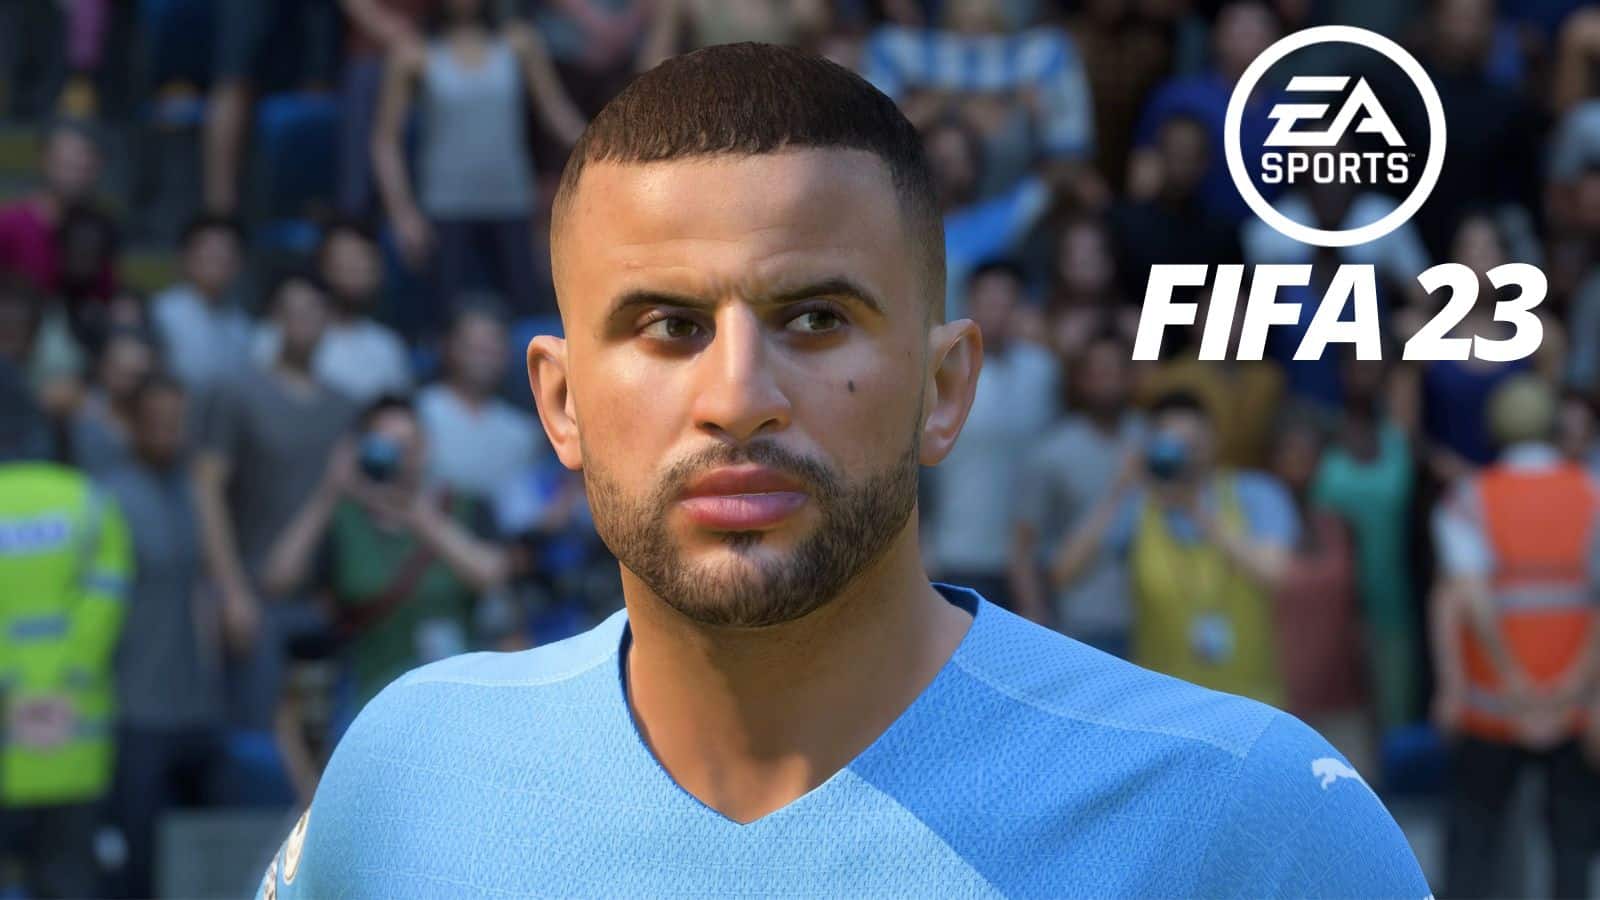 Kyle Walker with FIFA 23 logo